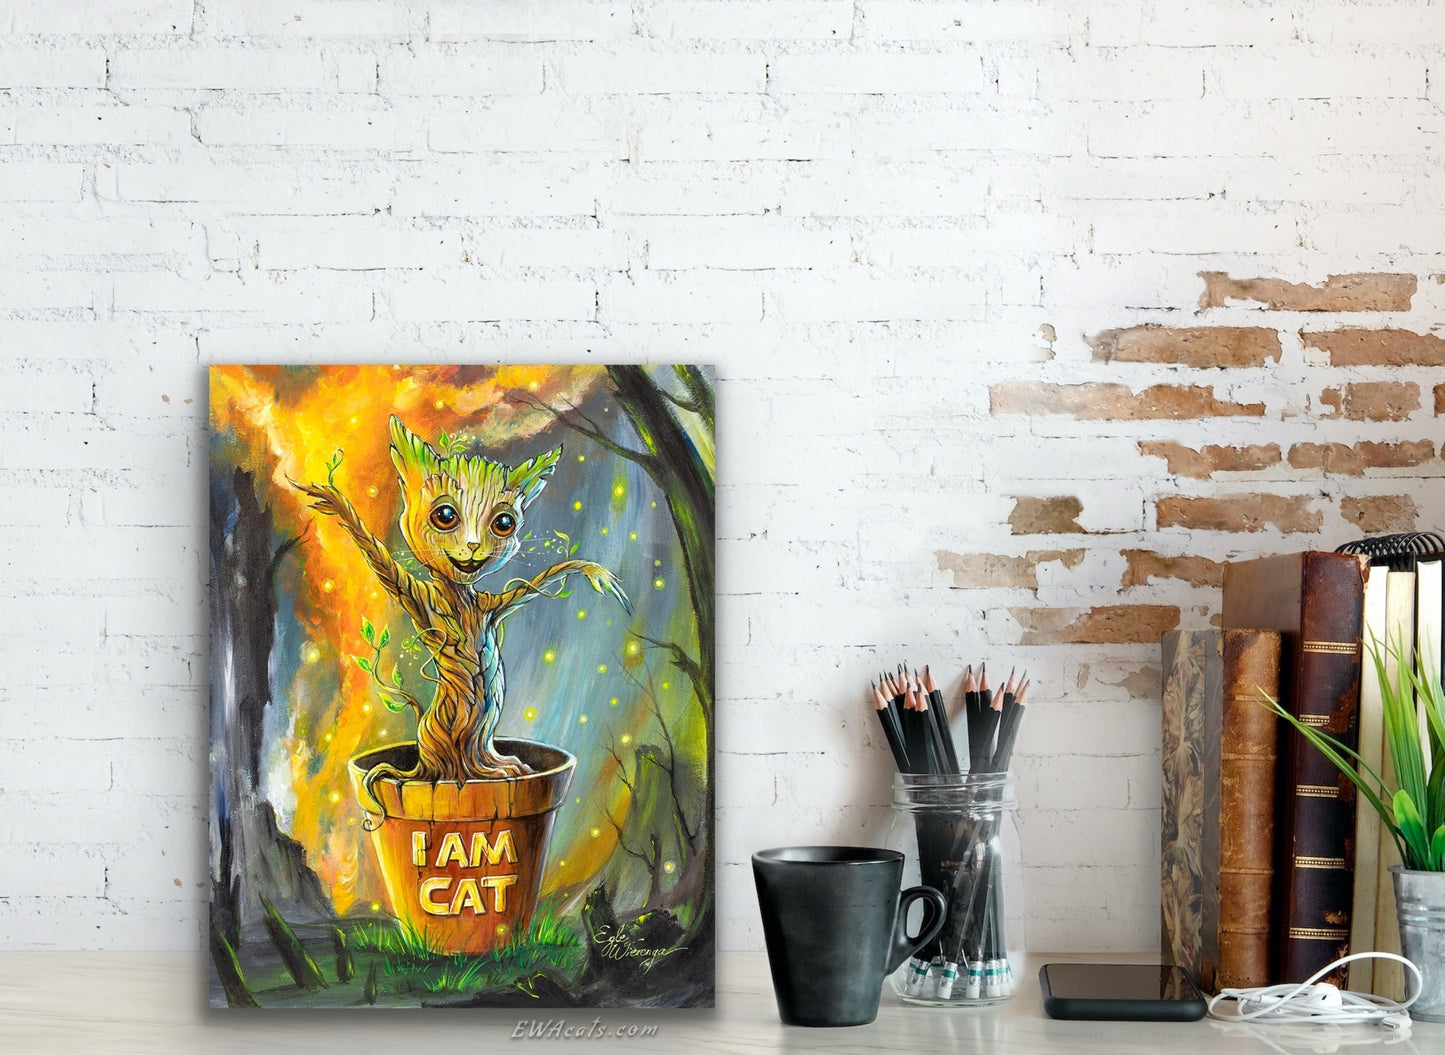 CANVAS "I AM CAT" Open & Limited Edition